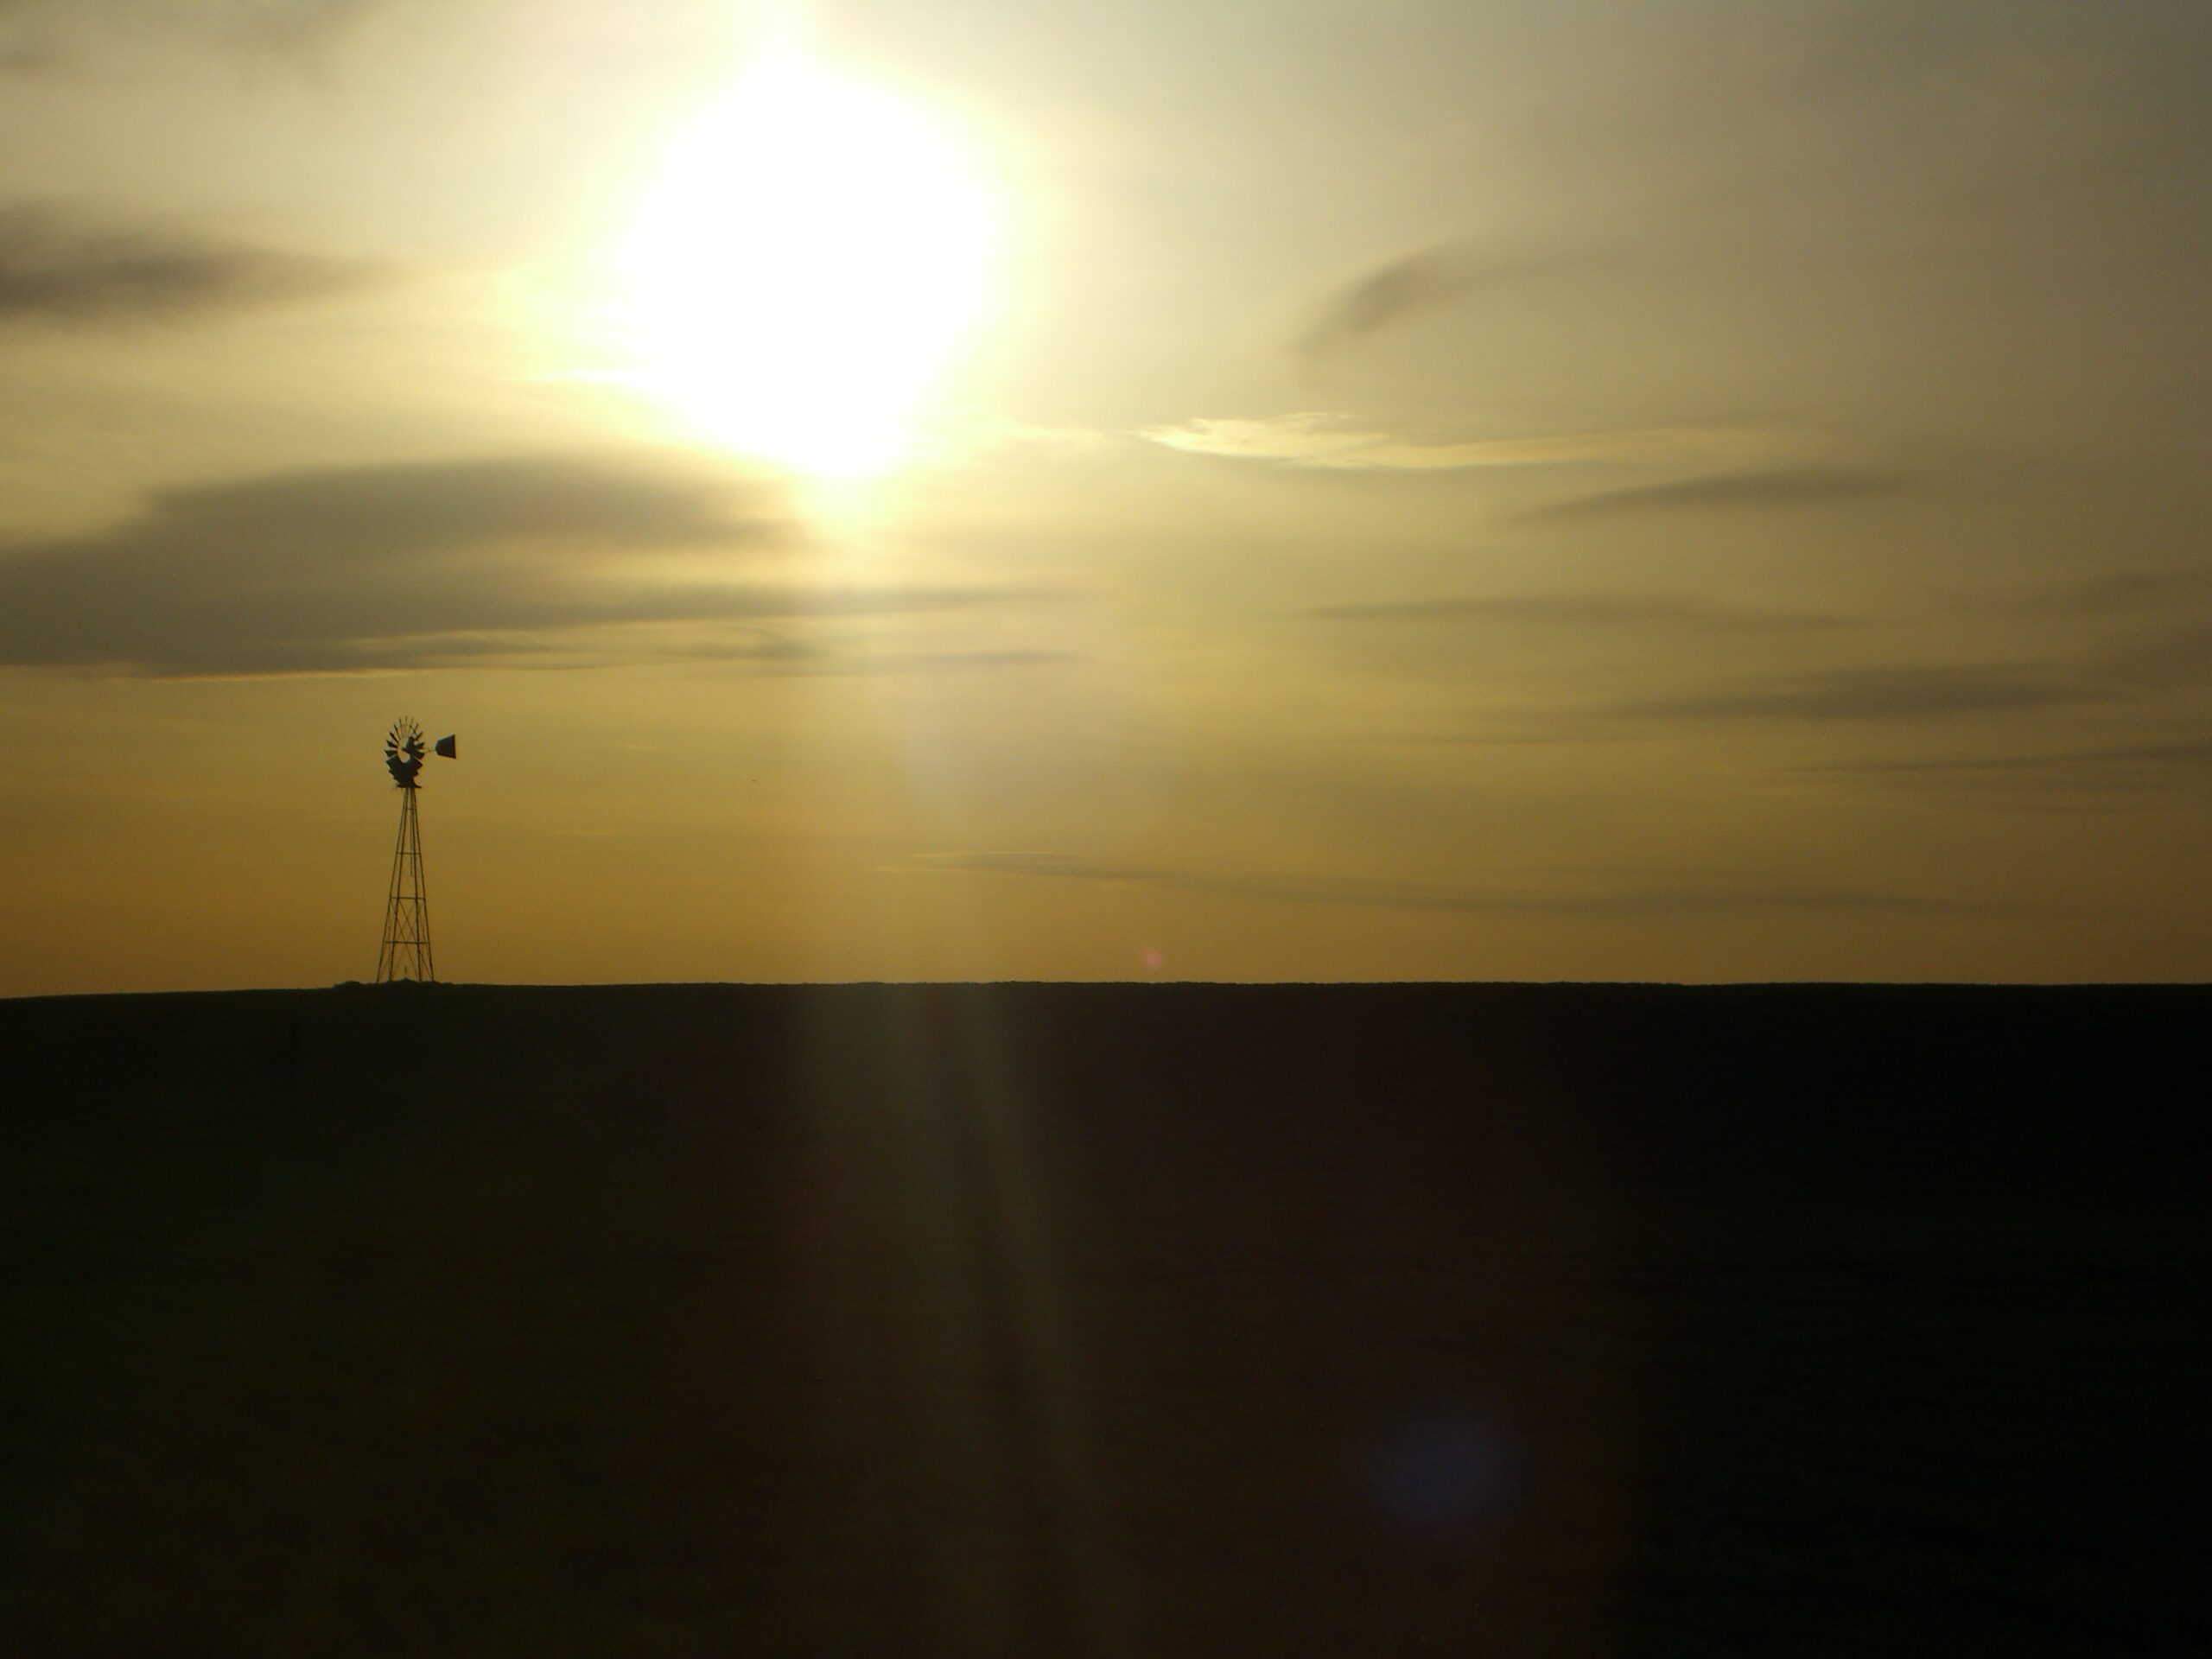 A windmill in the Yakima Valley at sunset